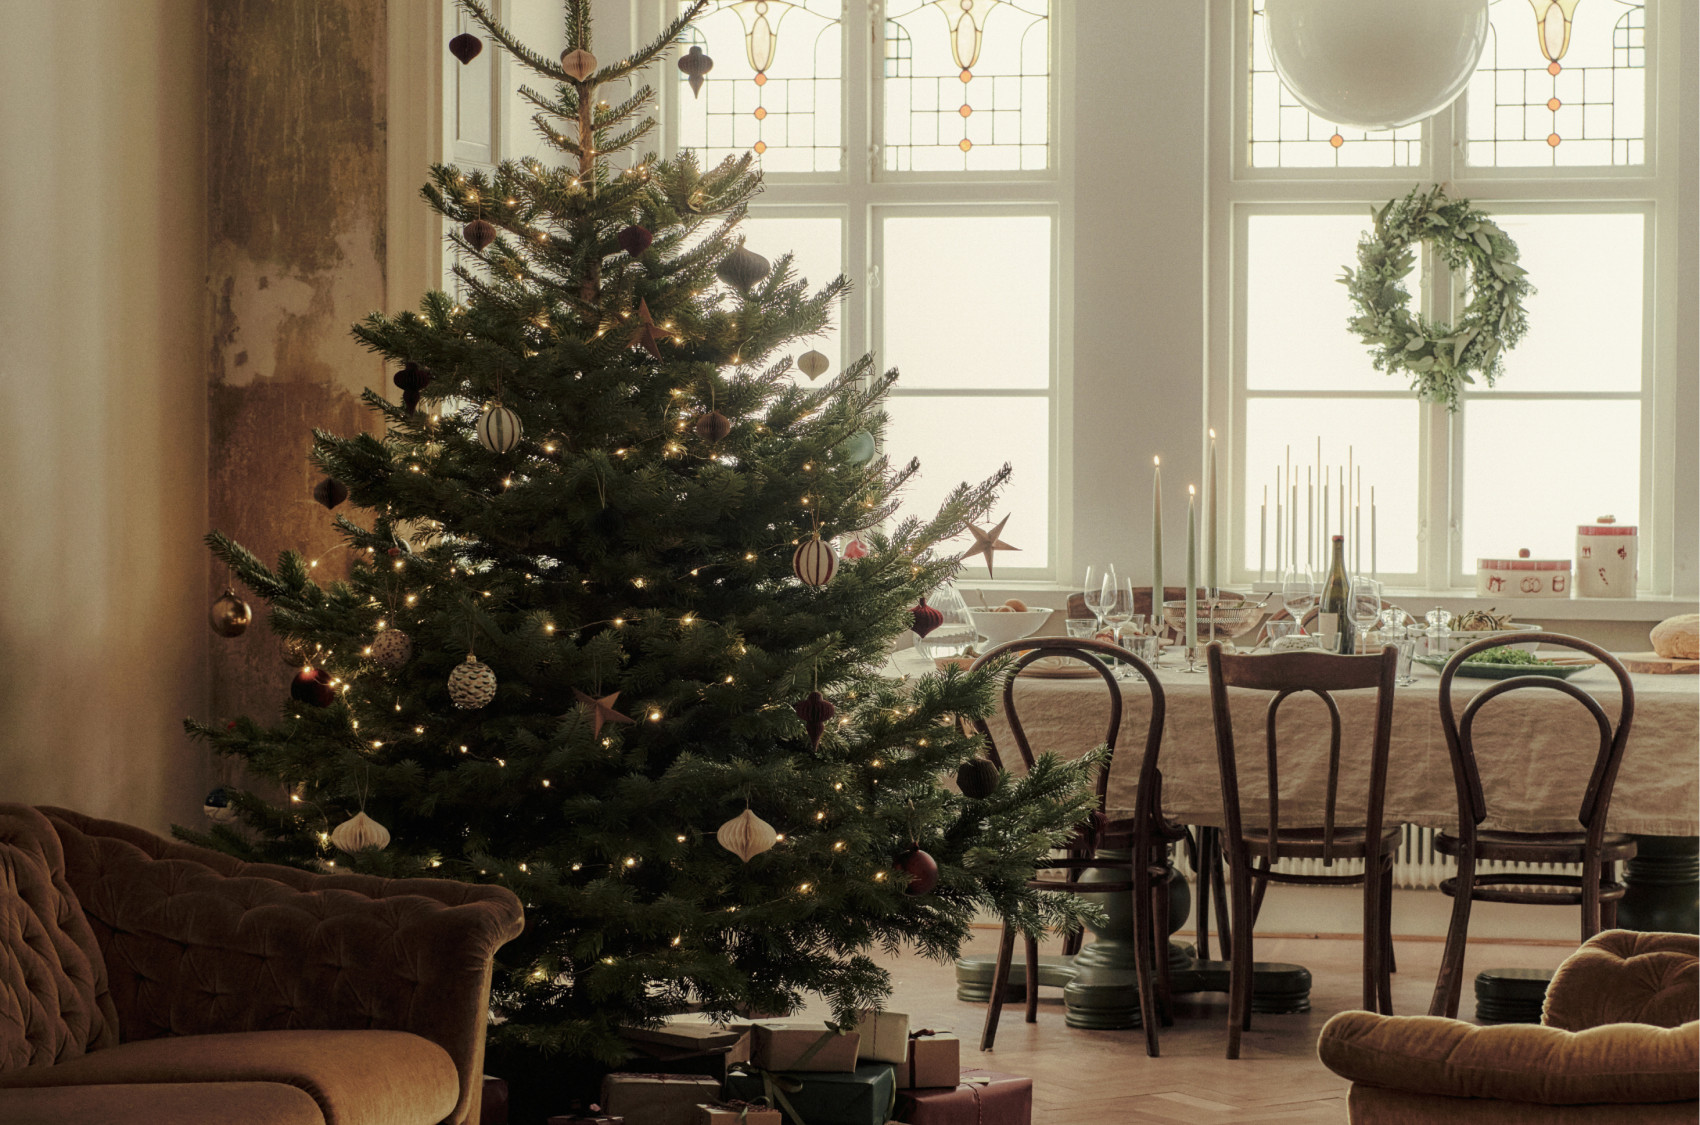 How to prep your home for Christmas